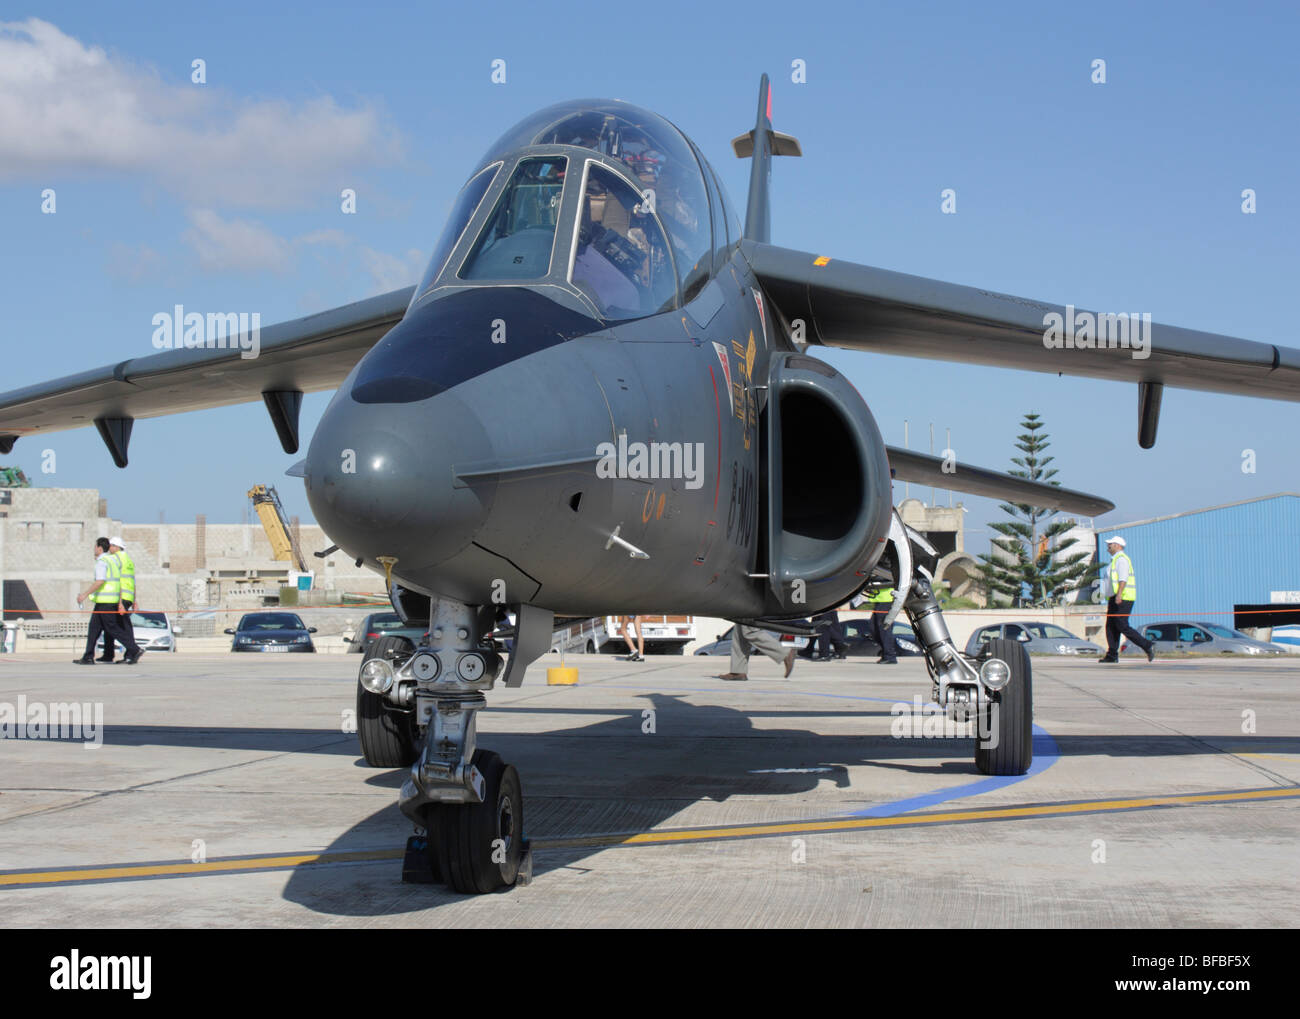 French Air Force Alpha Jet military training plane parked on airport apron Stock Photo